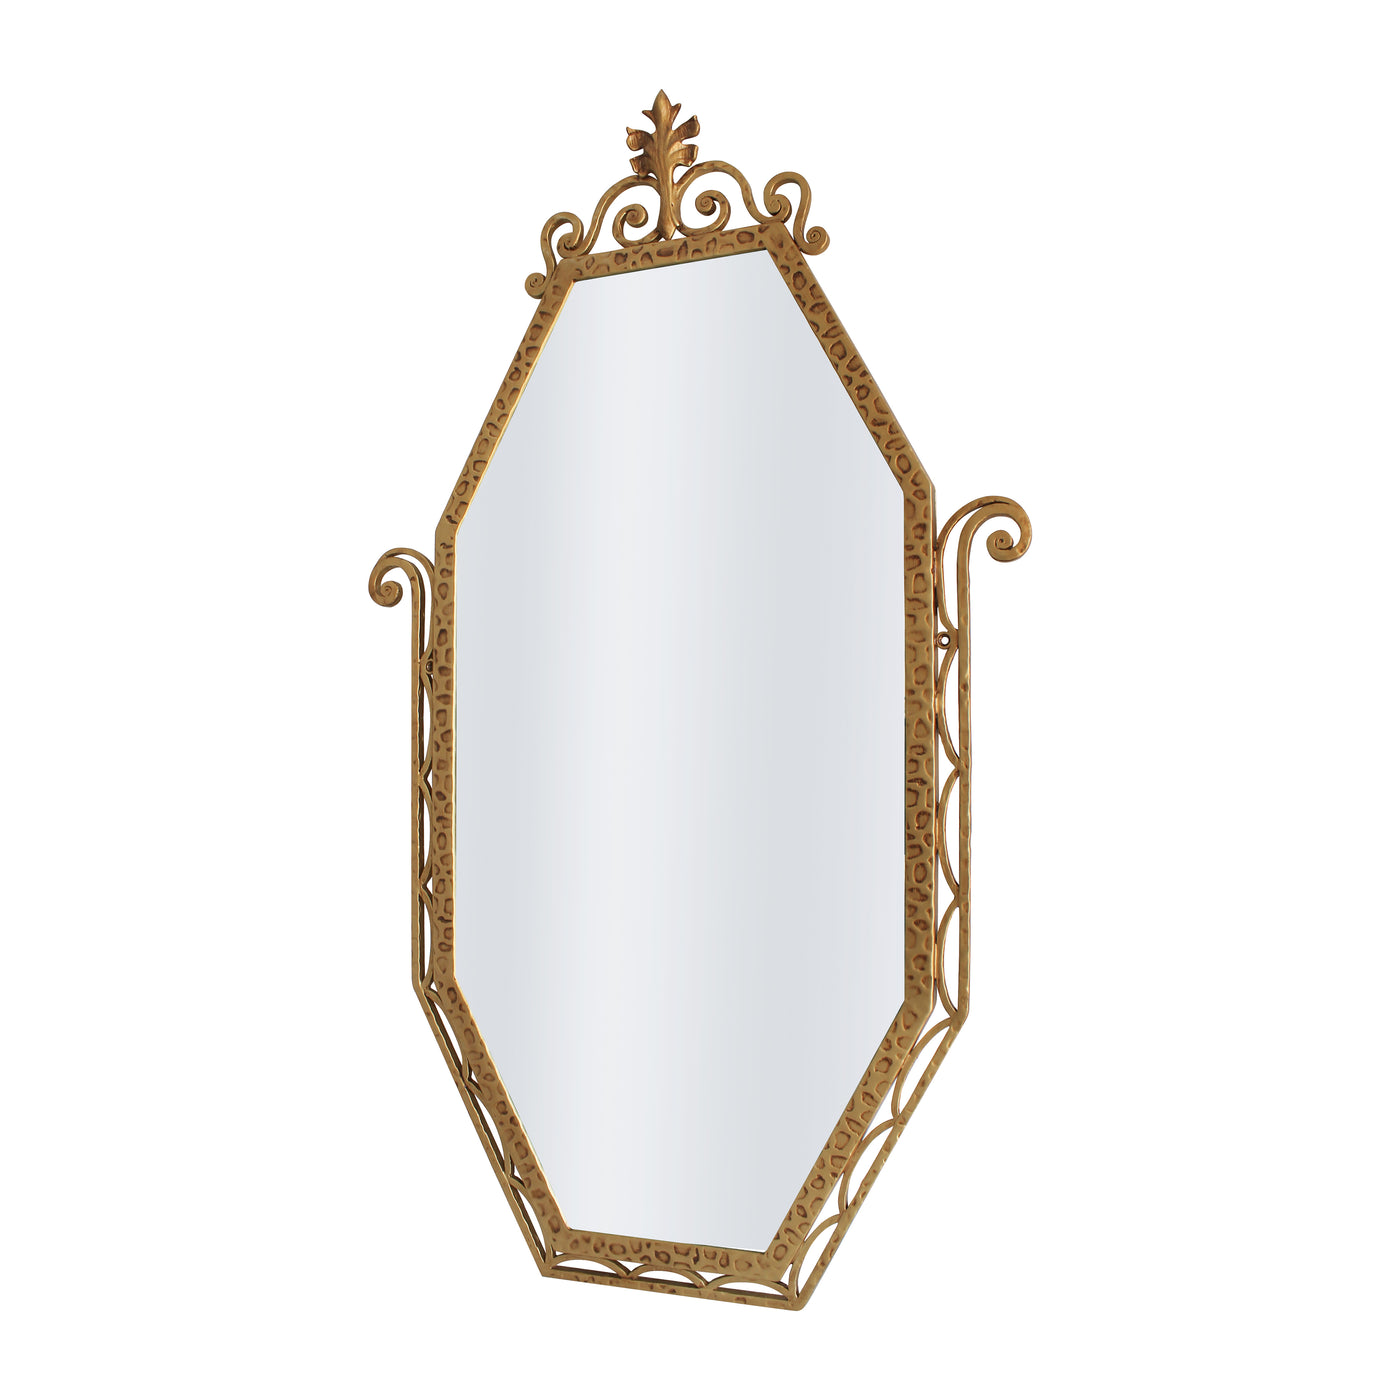 An Art Deco styled wrought iron mirror painted in an antique golden finish